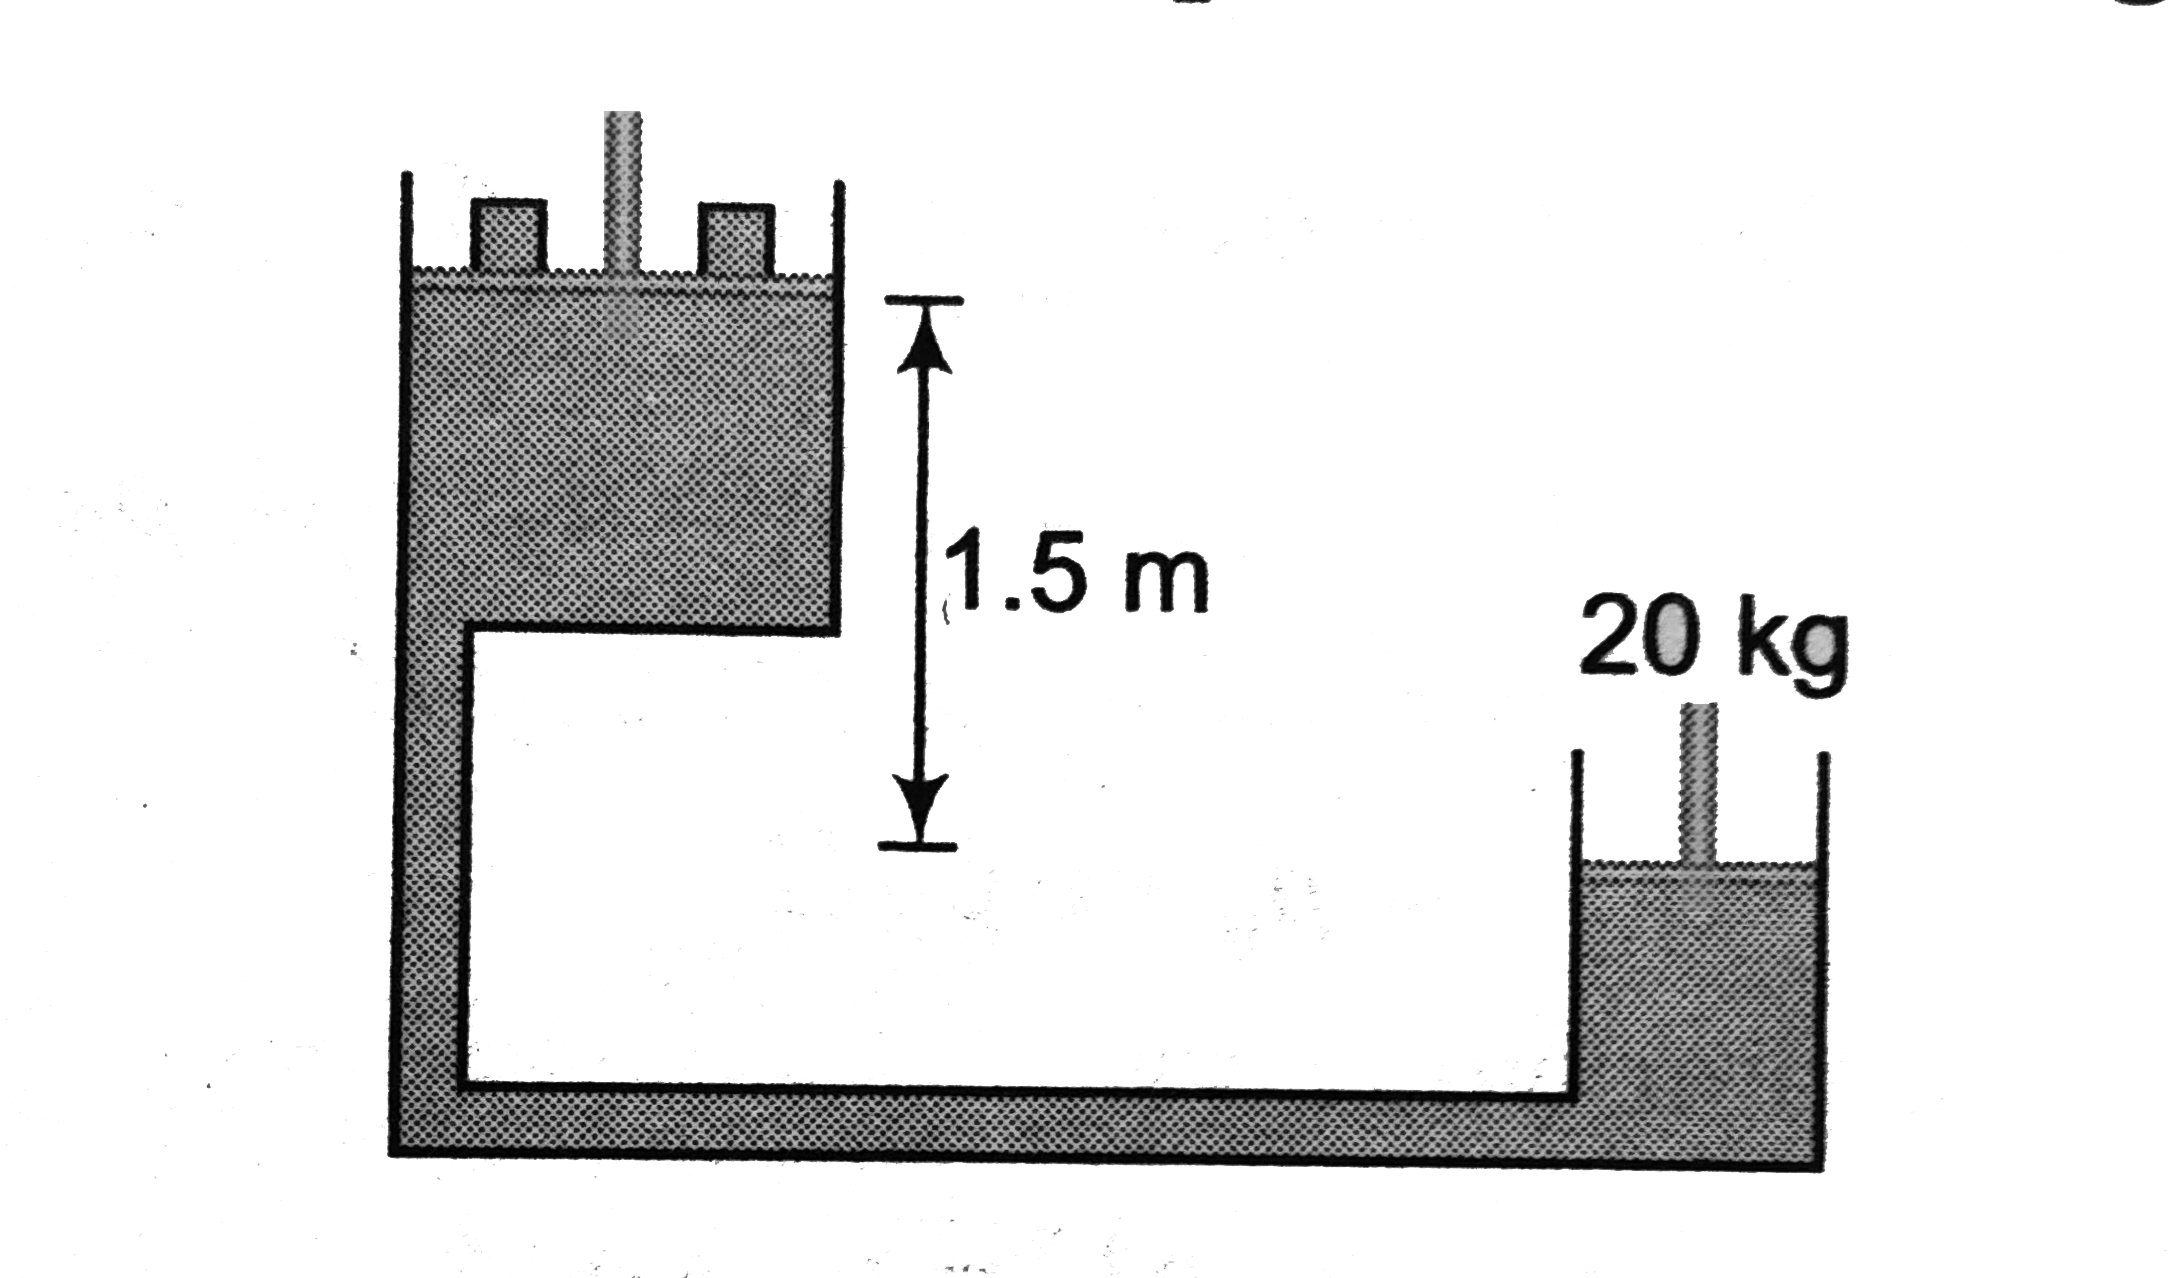 Figure shown a hydraulic press with the larger piston if diameter 35 cm at a height of 1.5 cm at a height of 1.5 m relative to the smaller piston of diameter 10cm. The mass on the smaller piston is 20 kg. What is the force exerted on the load by the larger piston? The density of oil in the press is 750 kh//m^(3) . (Take g=9.8 m//s^(2))   .